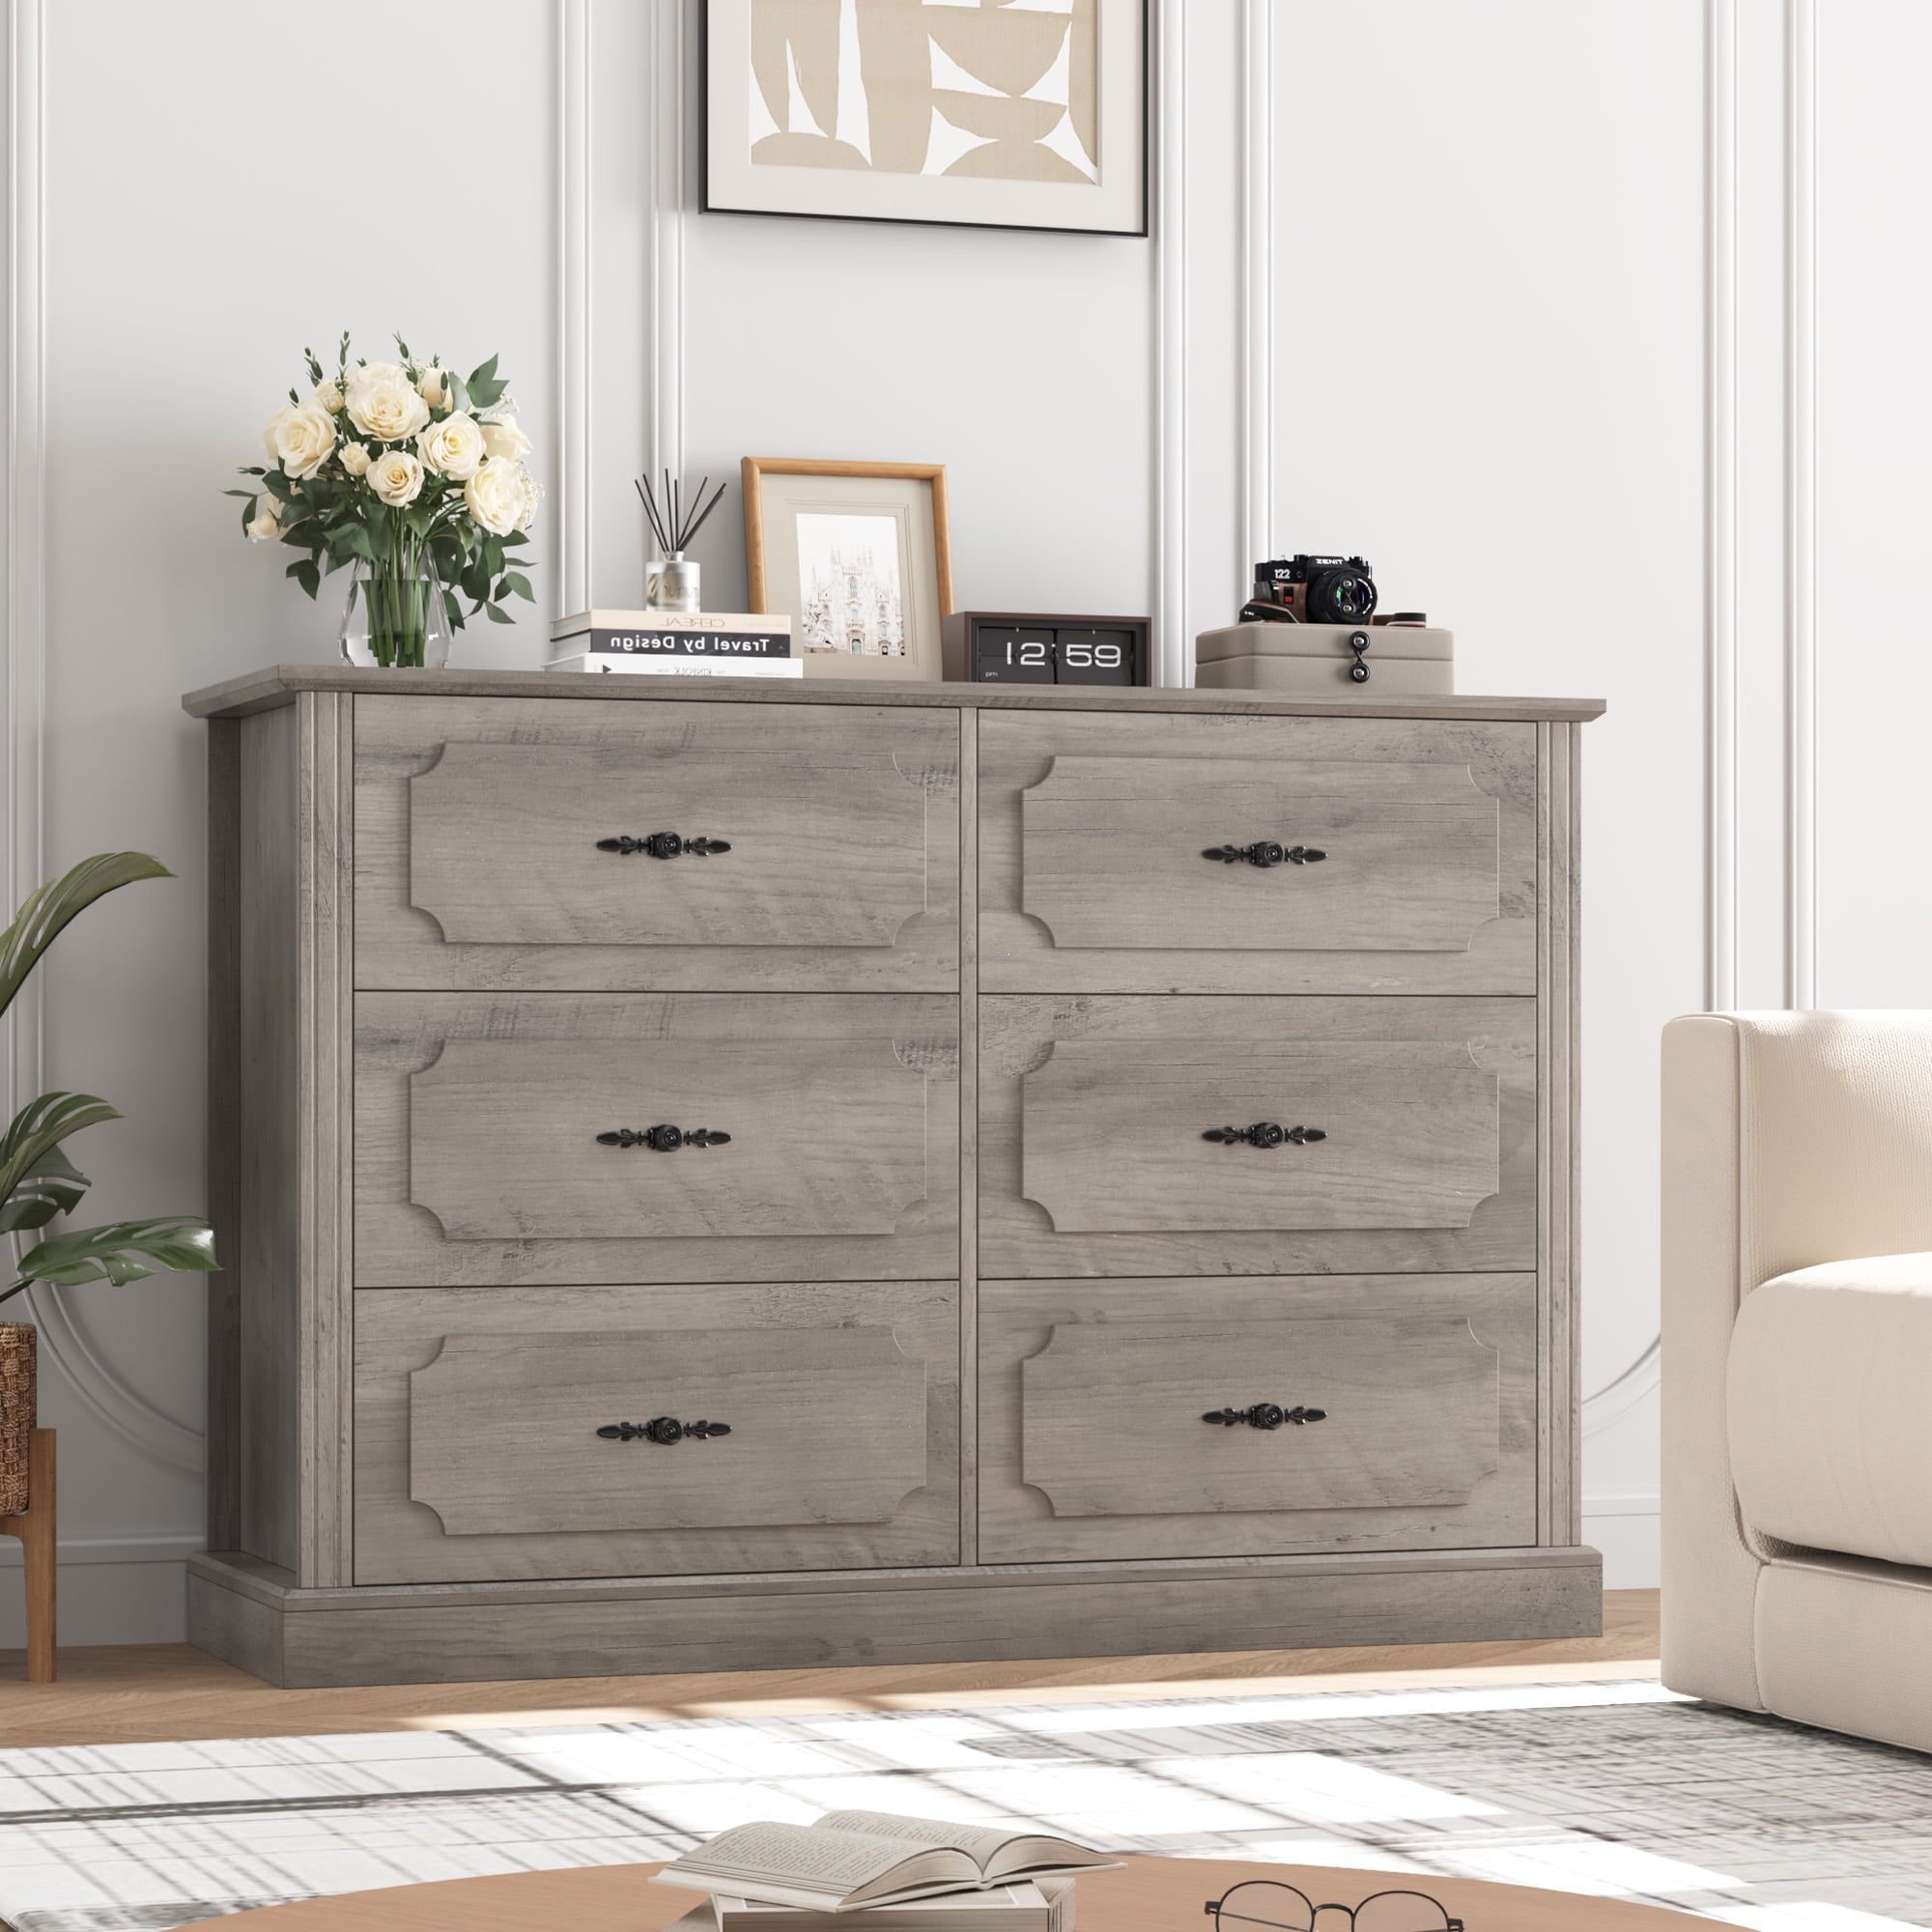 Homfa 6 Drawer Double Bedroom Dresser, Vintage Wood Storage Cabinet Large Drawer Chest for Living Room, Easy to Clean Top, Wash Gray - image 1 of 7